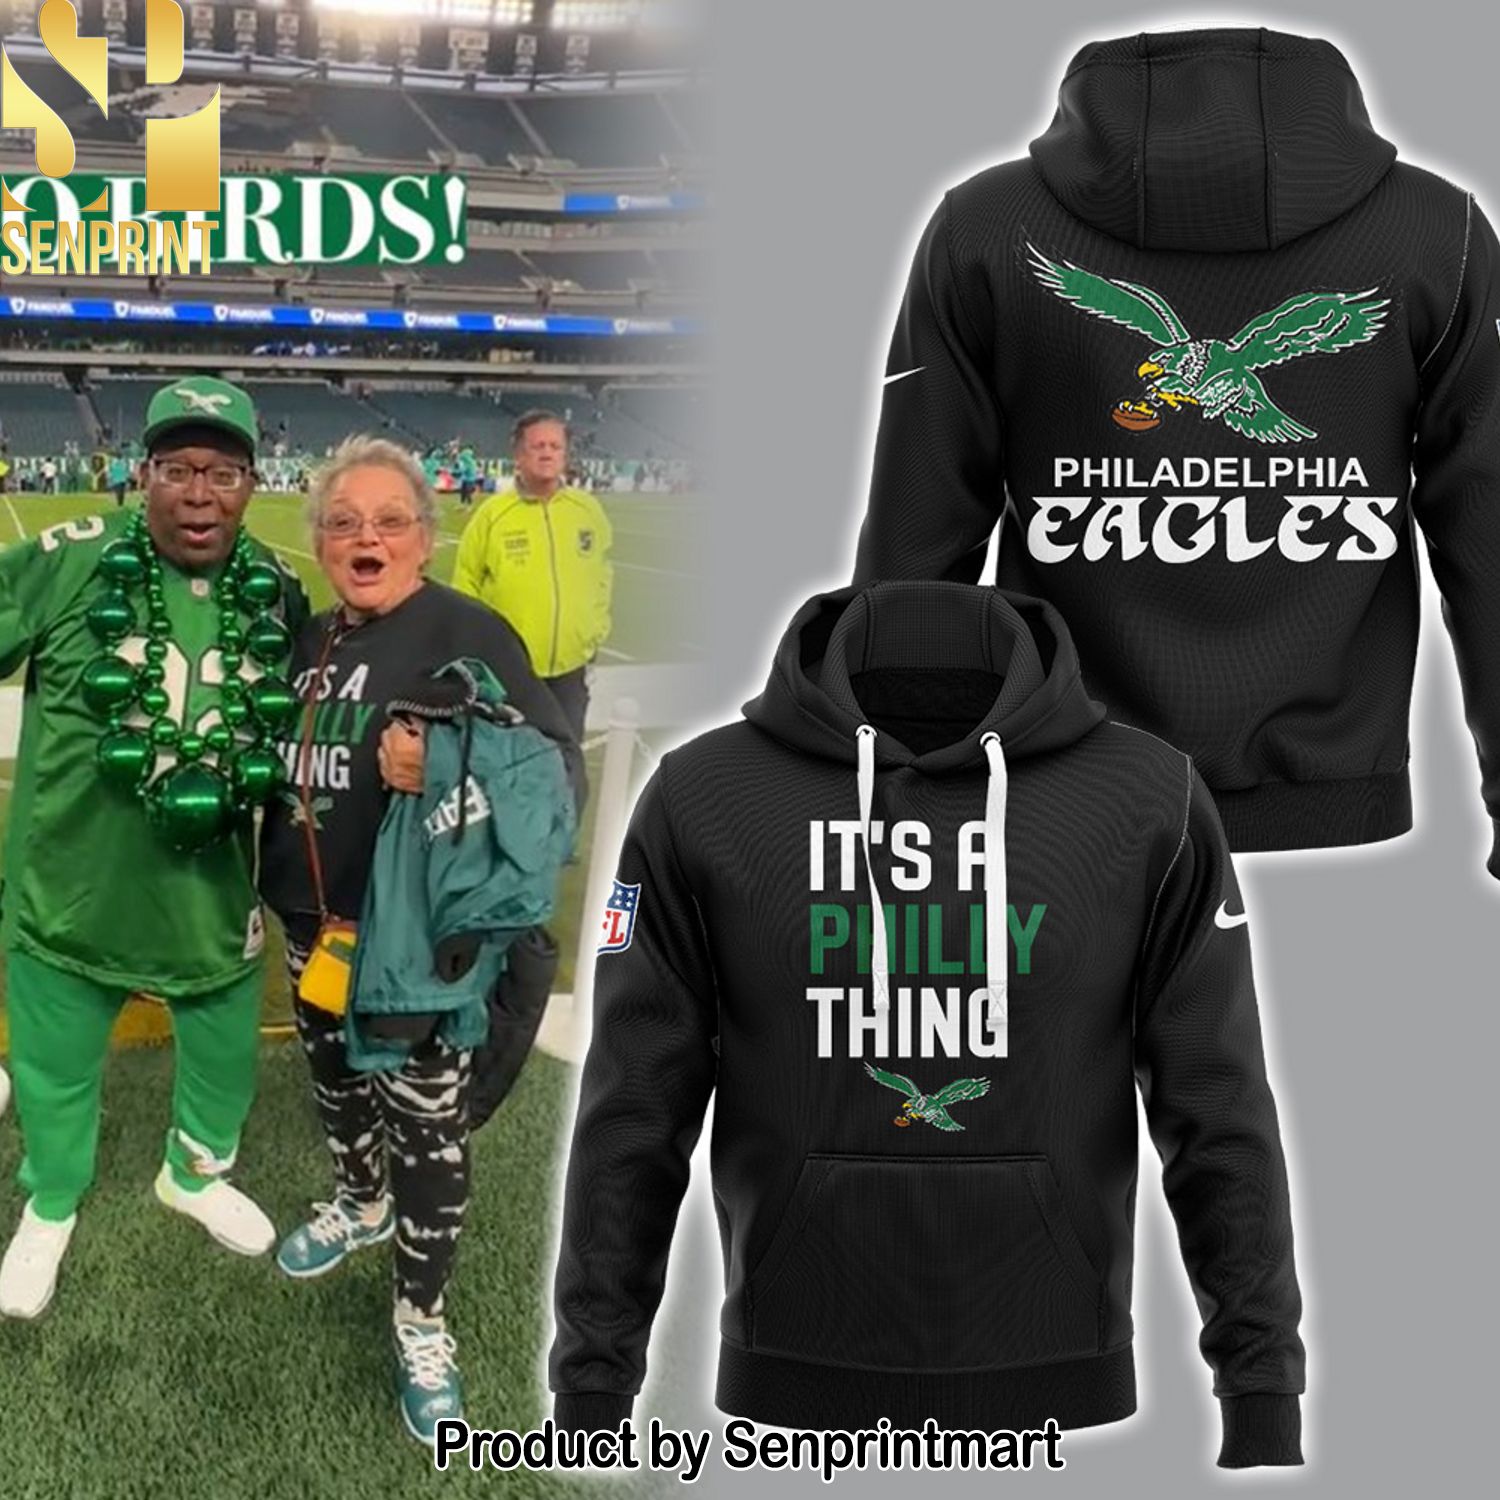 Philadelphia Eagles It’s a Philly thing Hot Fashion 3D Shirt